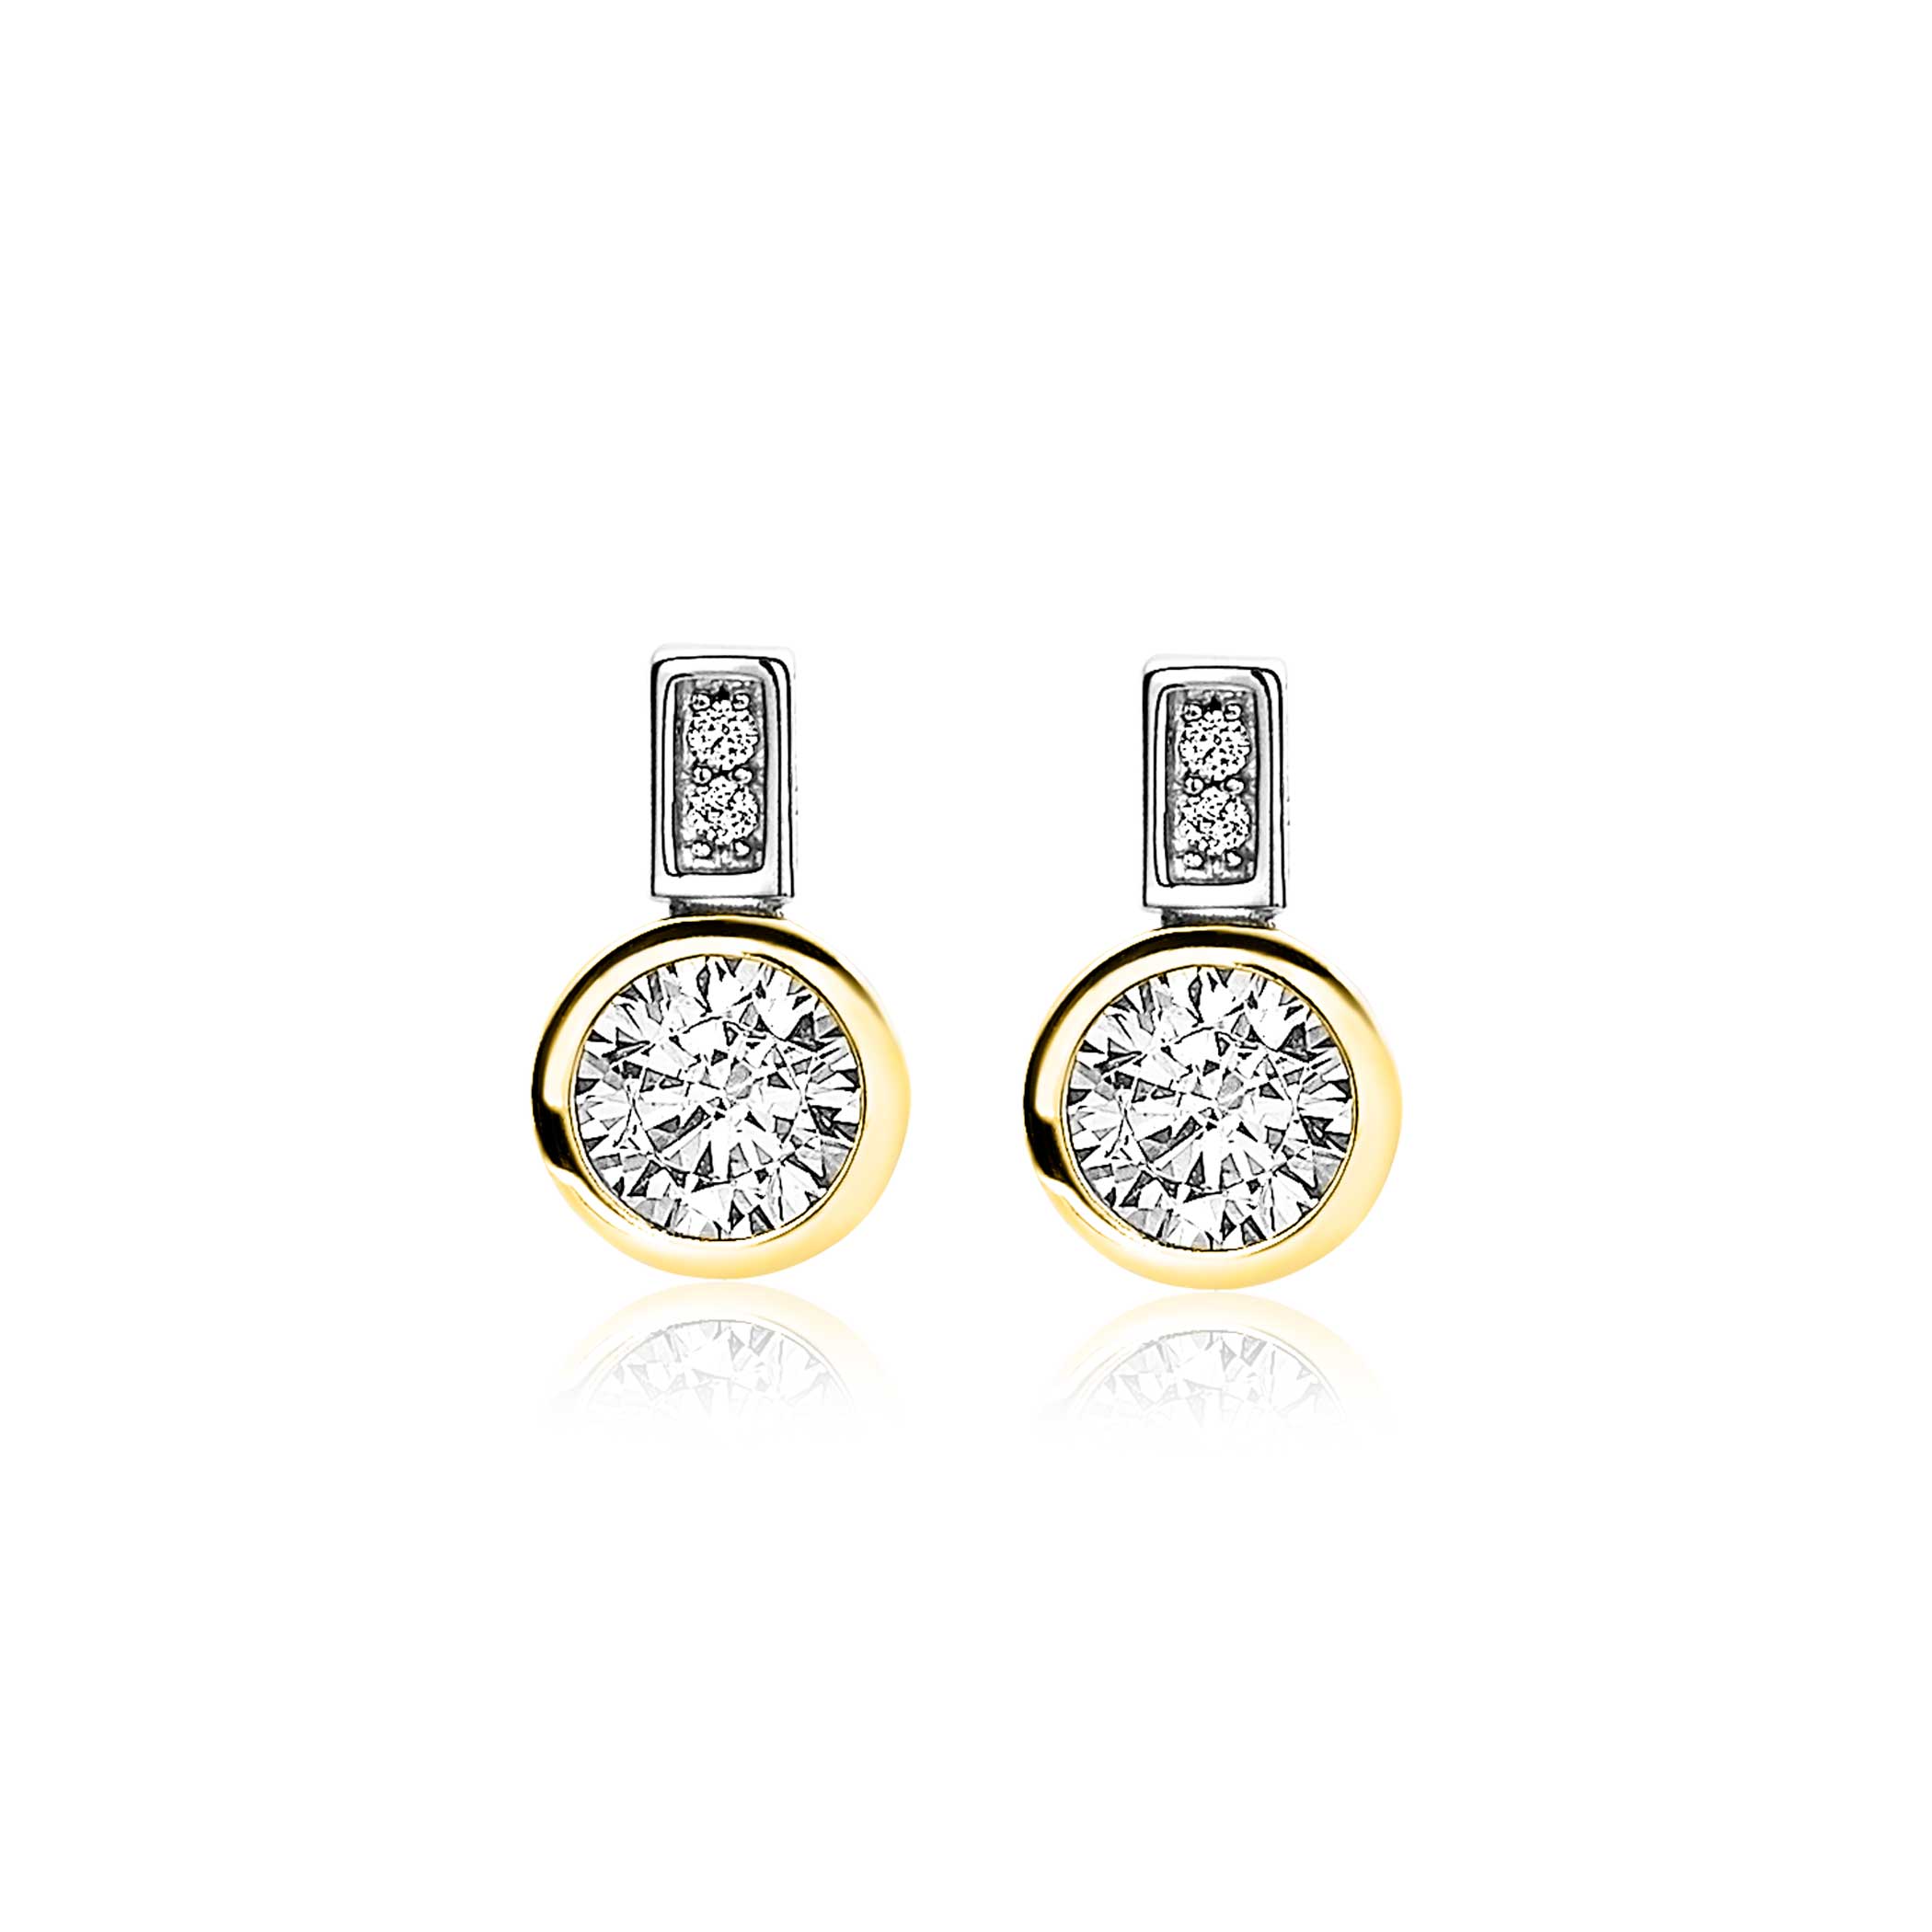 ZINZI Gold Plated Sterling Silver Stud Earrings Round White ZIO1662G